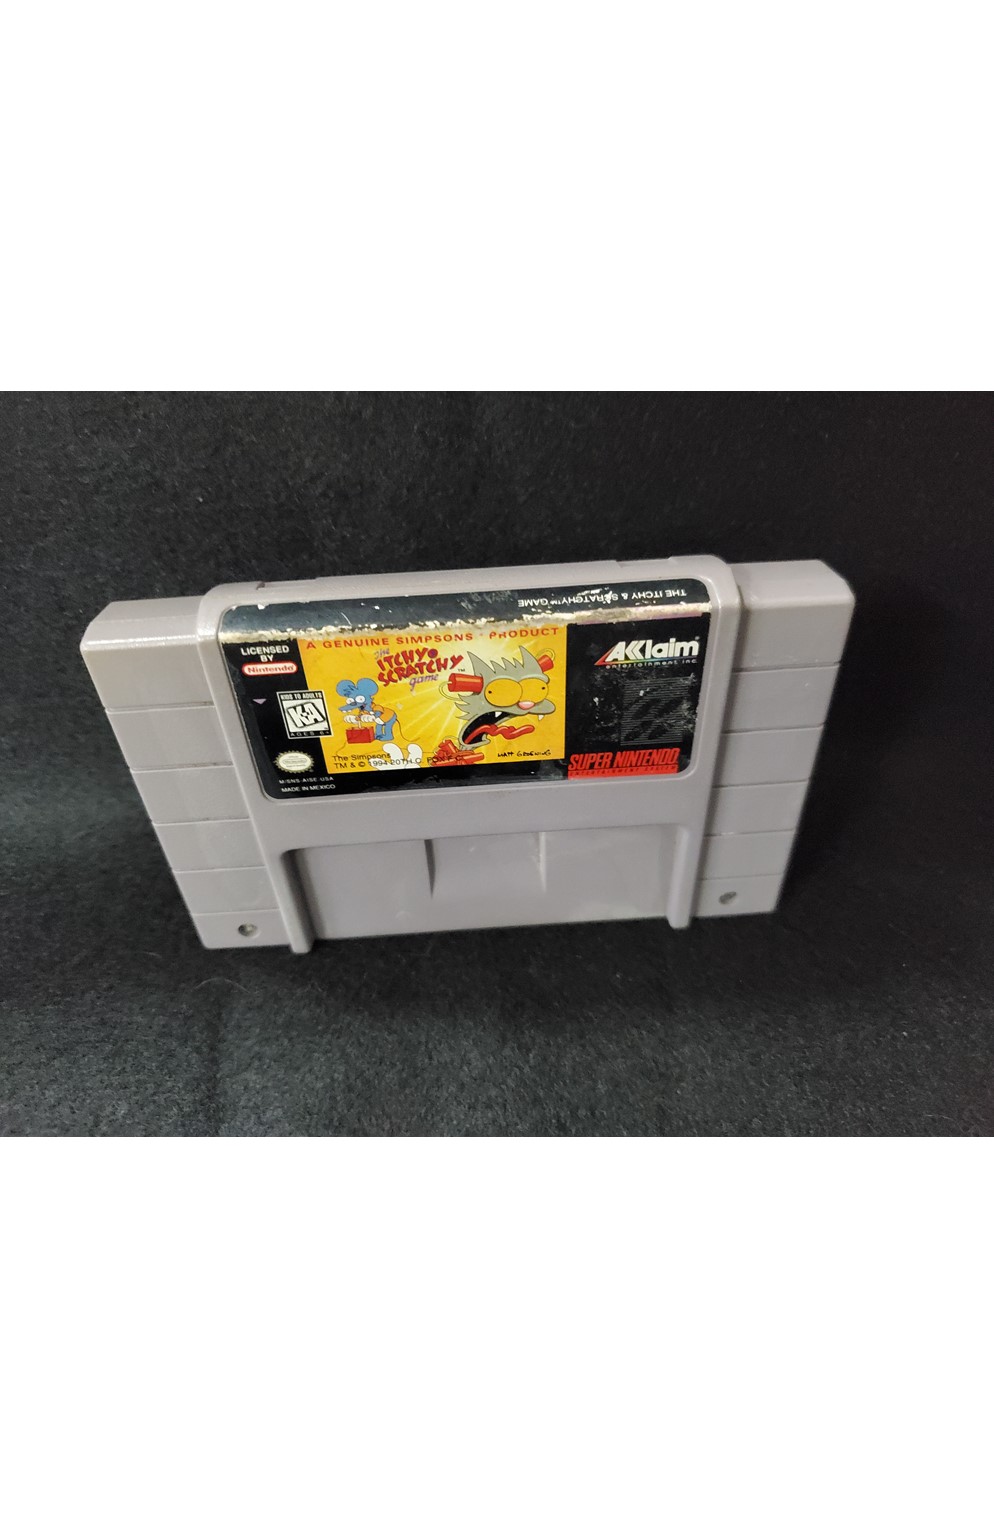 Super Nintendo Snes Itchy & Scratchy Game